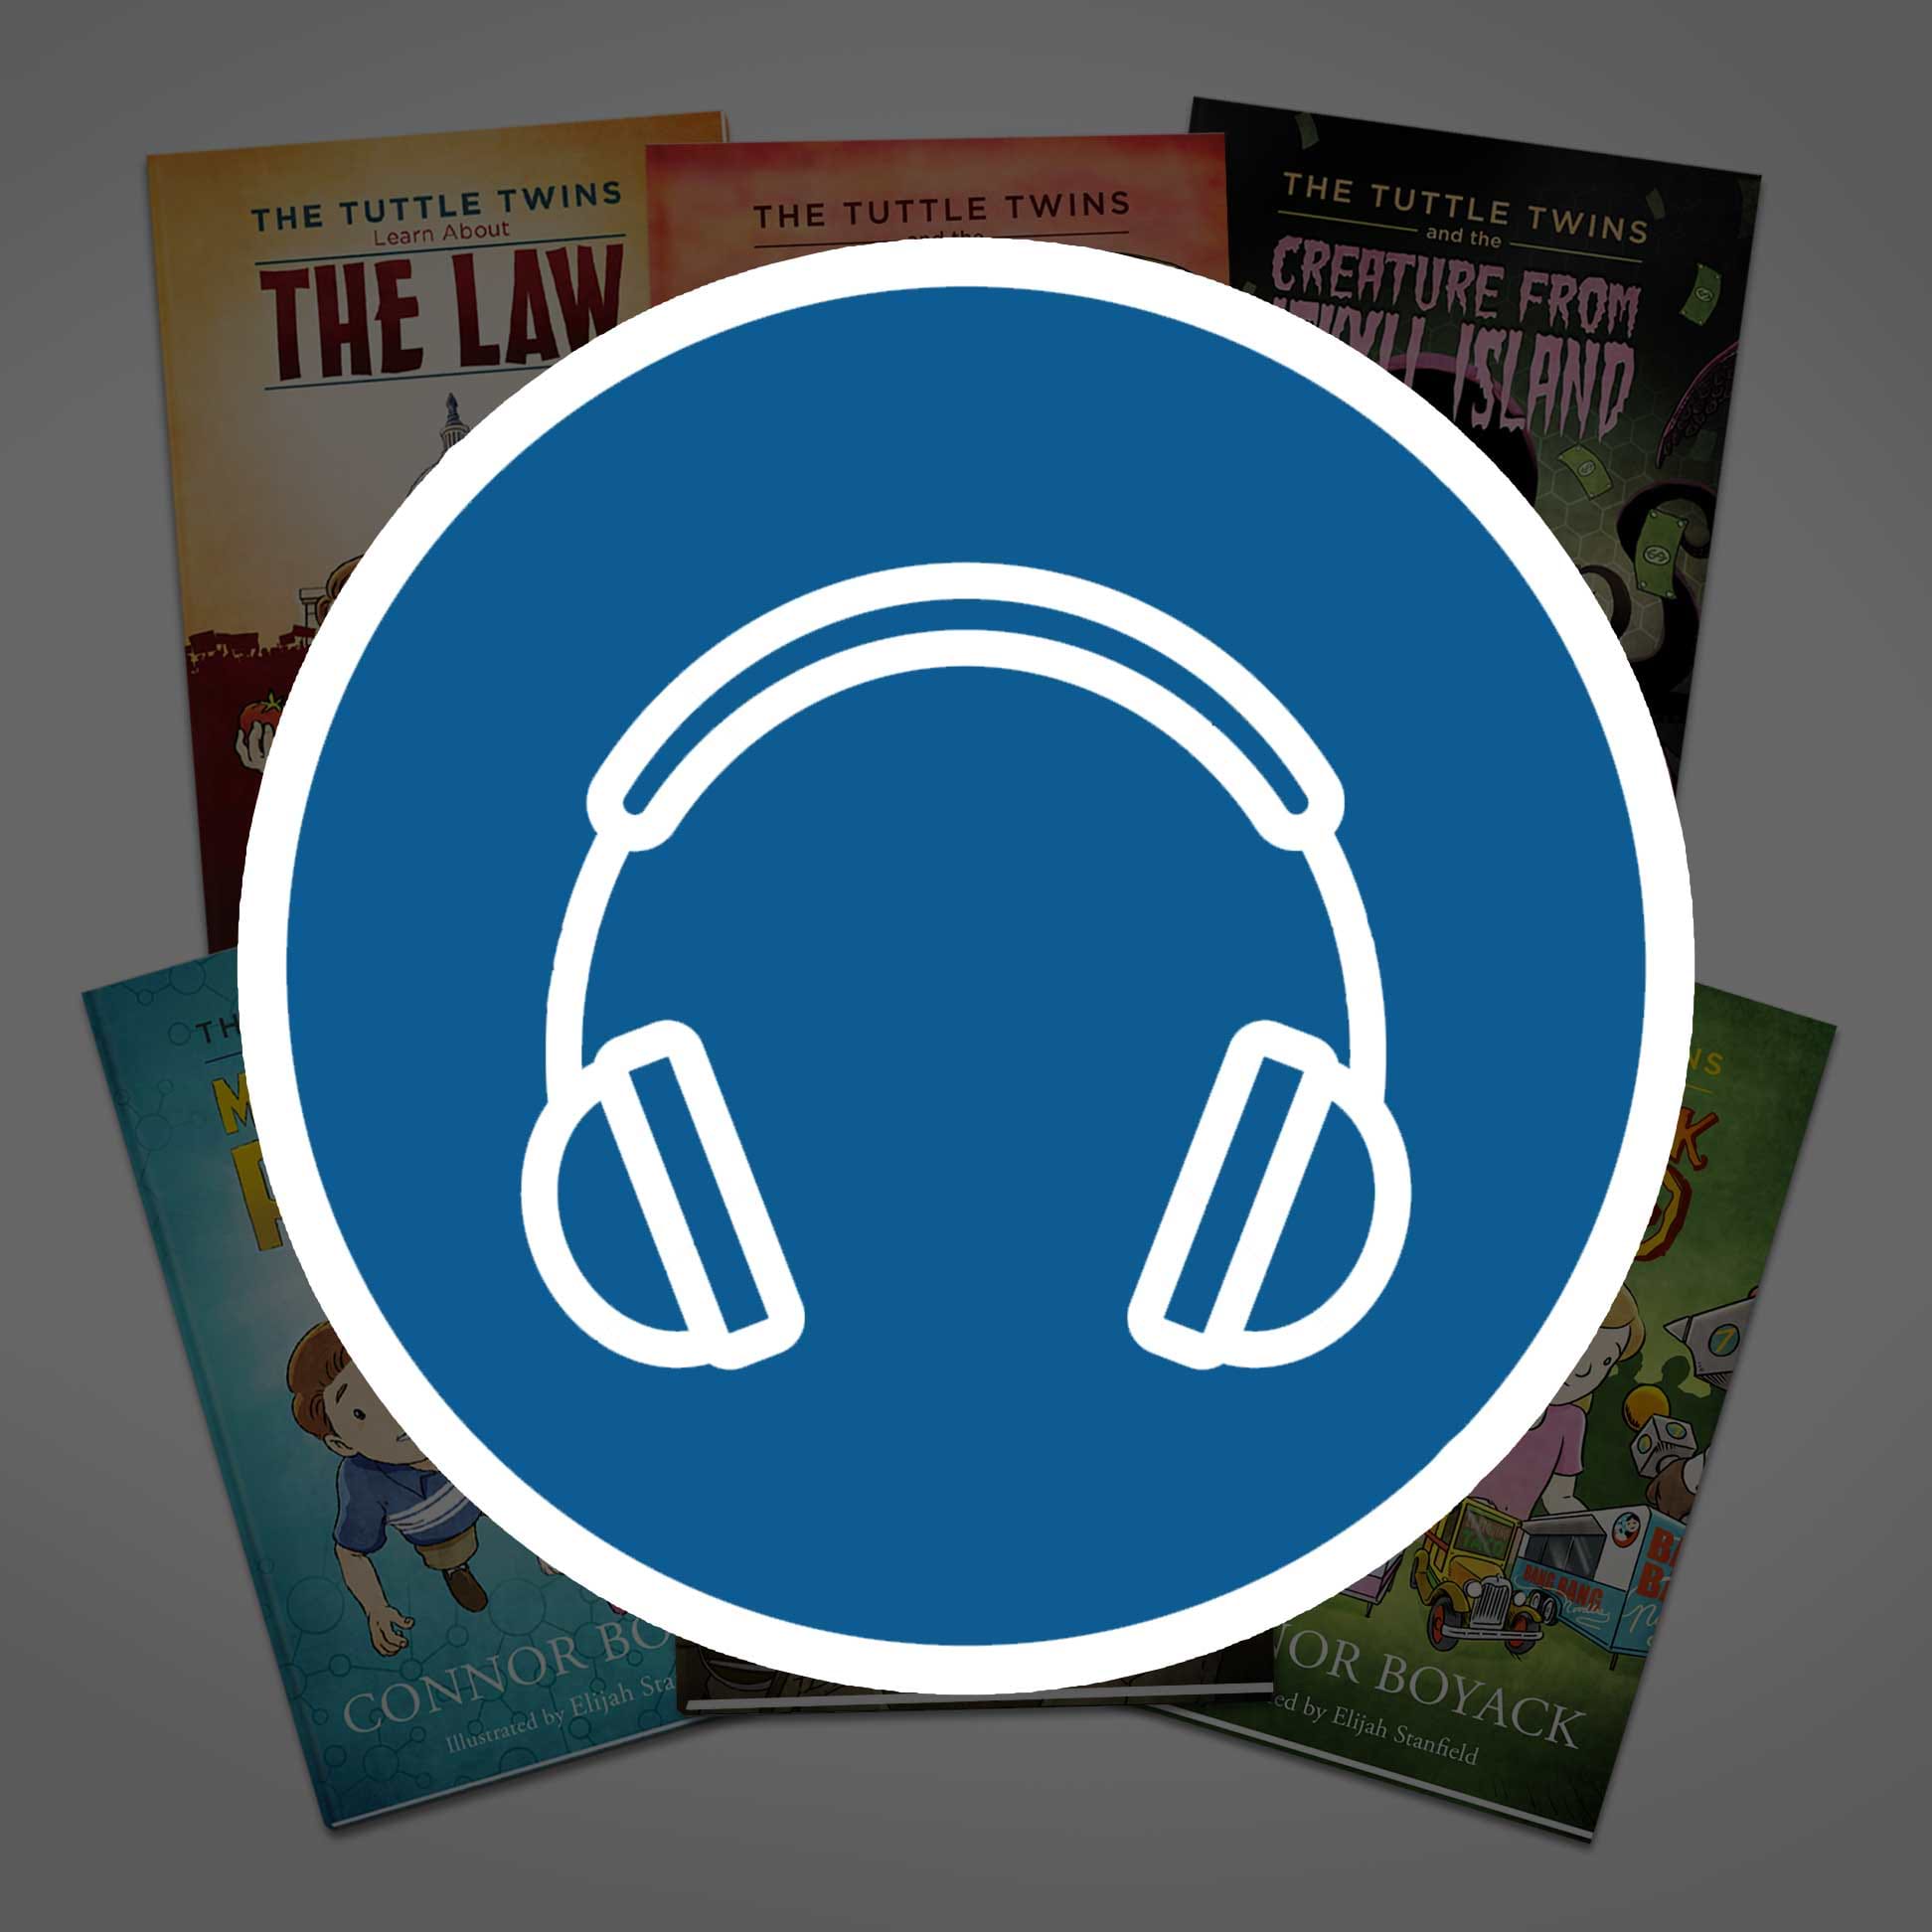 Tuttle Twins Audiobooks (ALL 13 - DISCOUNT)